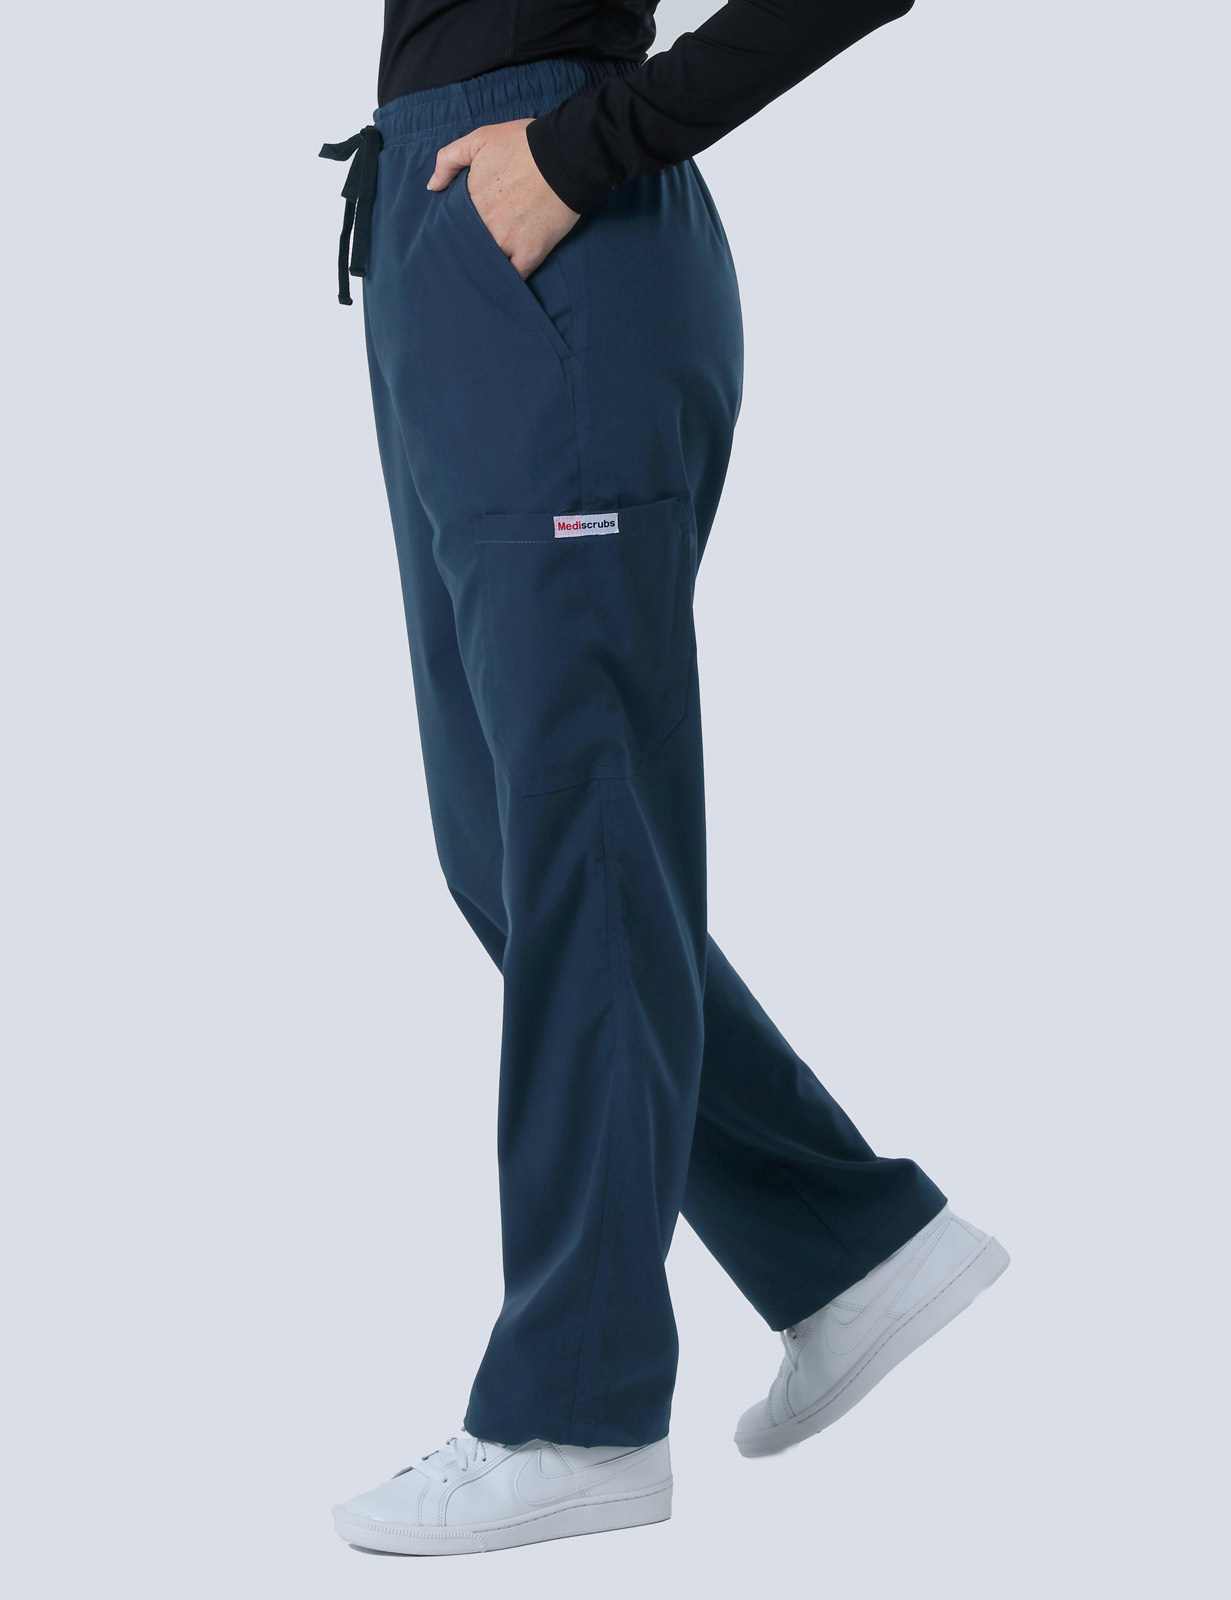 Frankston - AAAU/CNS (Women's Fit Solid Scrub Top and Cargo Pants in Navy incl Logos)